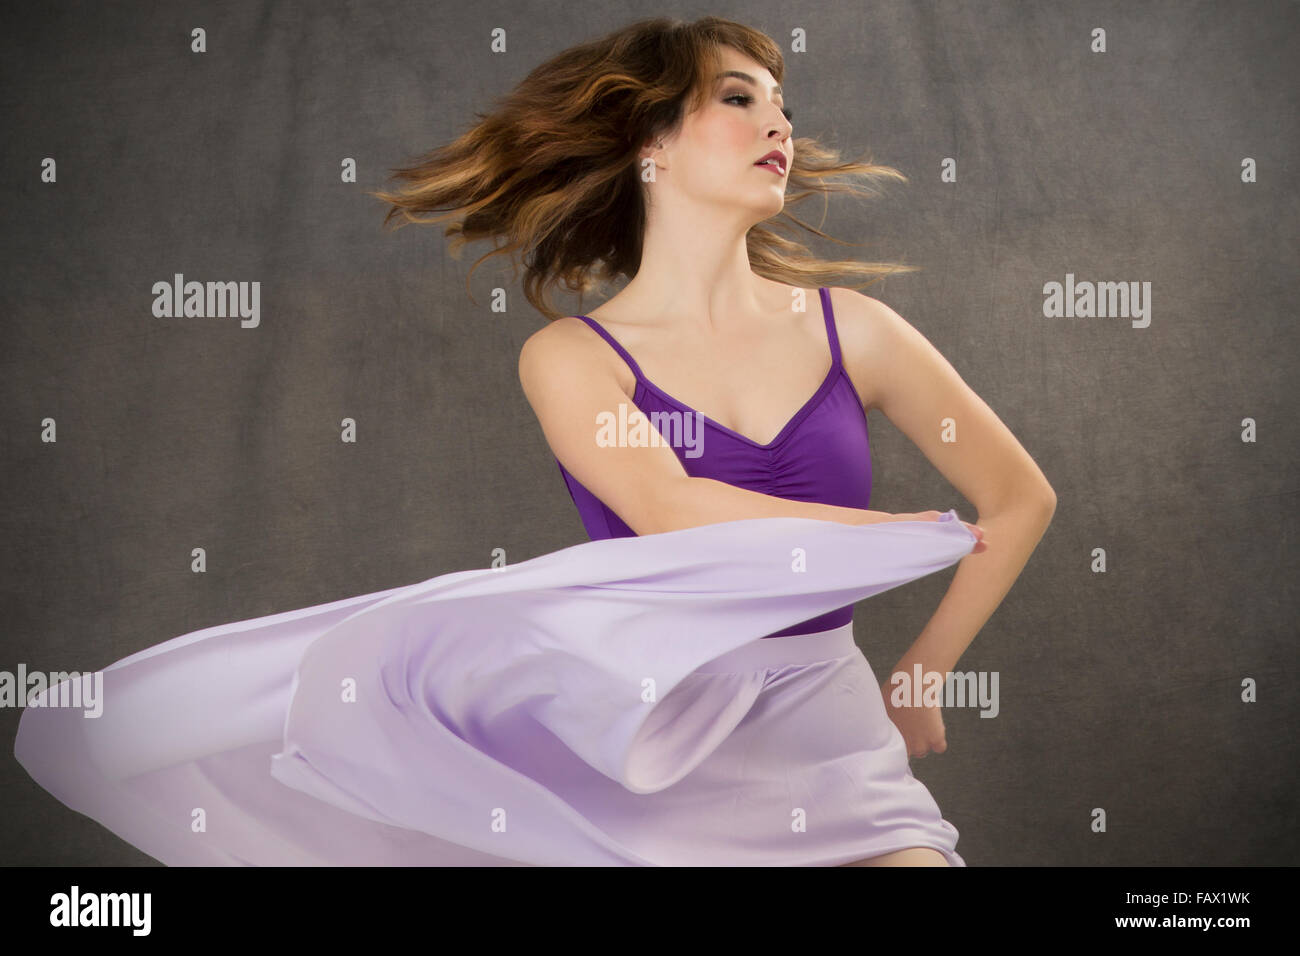 Attractive young woman dancer, turning in purple leotard and flowing lavender dress, from waist up on gray background. Stock Photo